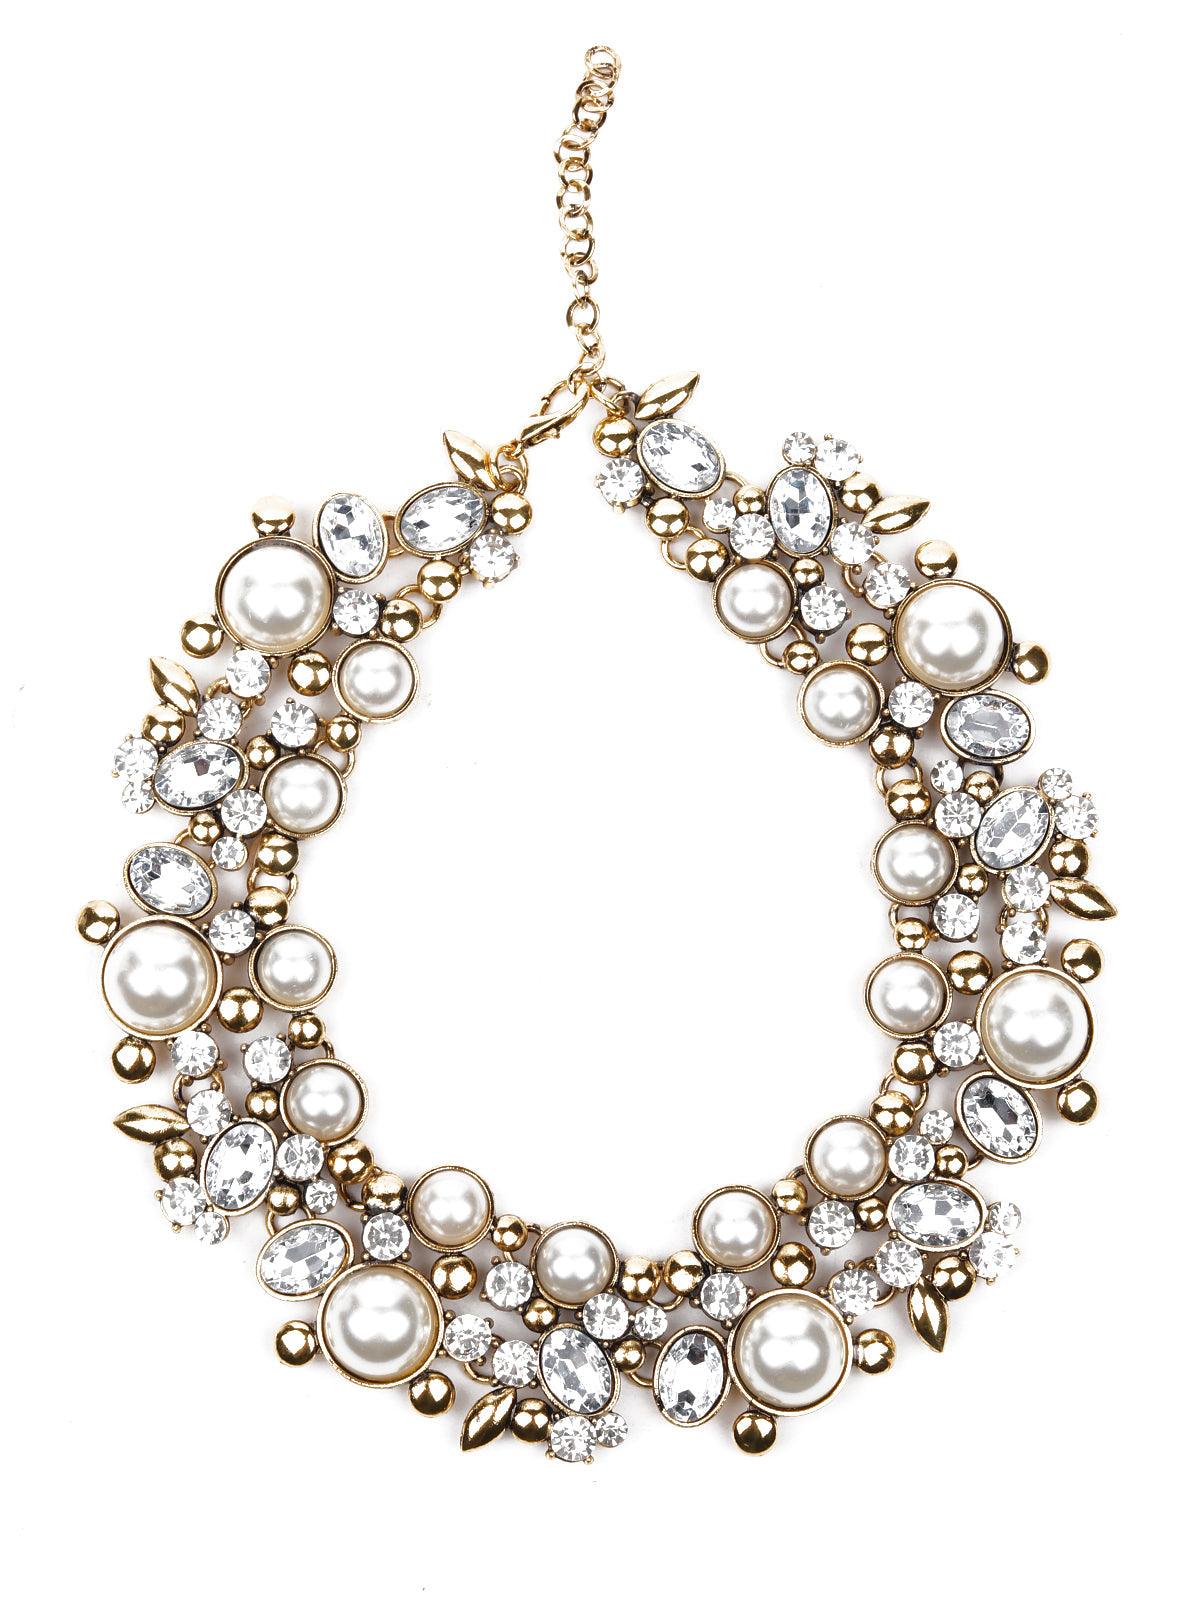 Women's Very Elegant Rounded Embellished With Crystals And Pearls Necklace - Odette